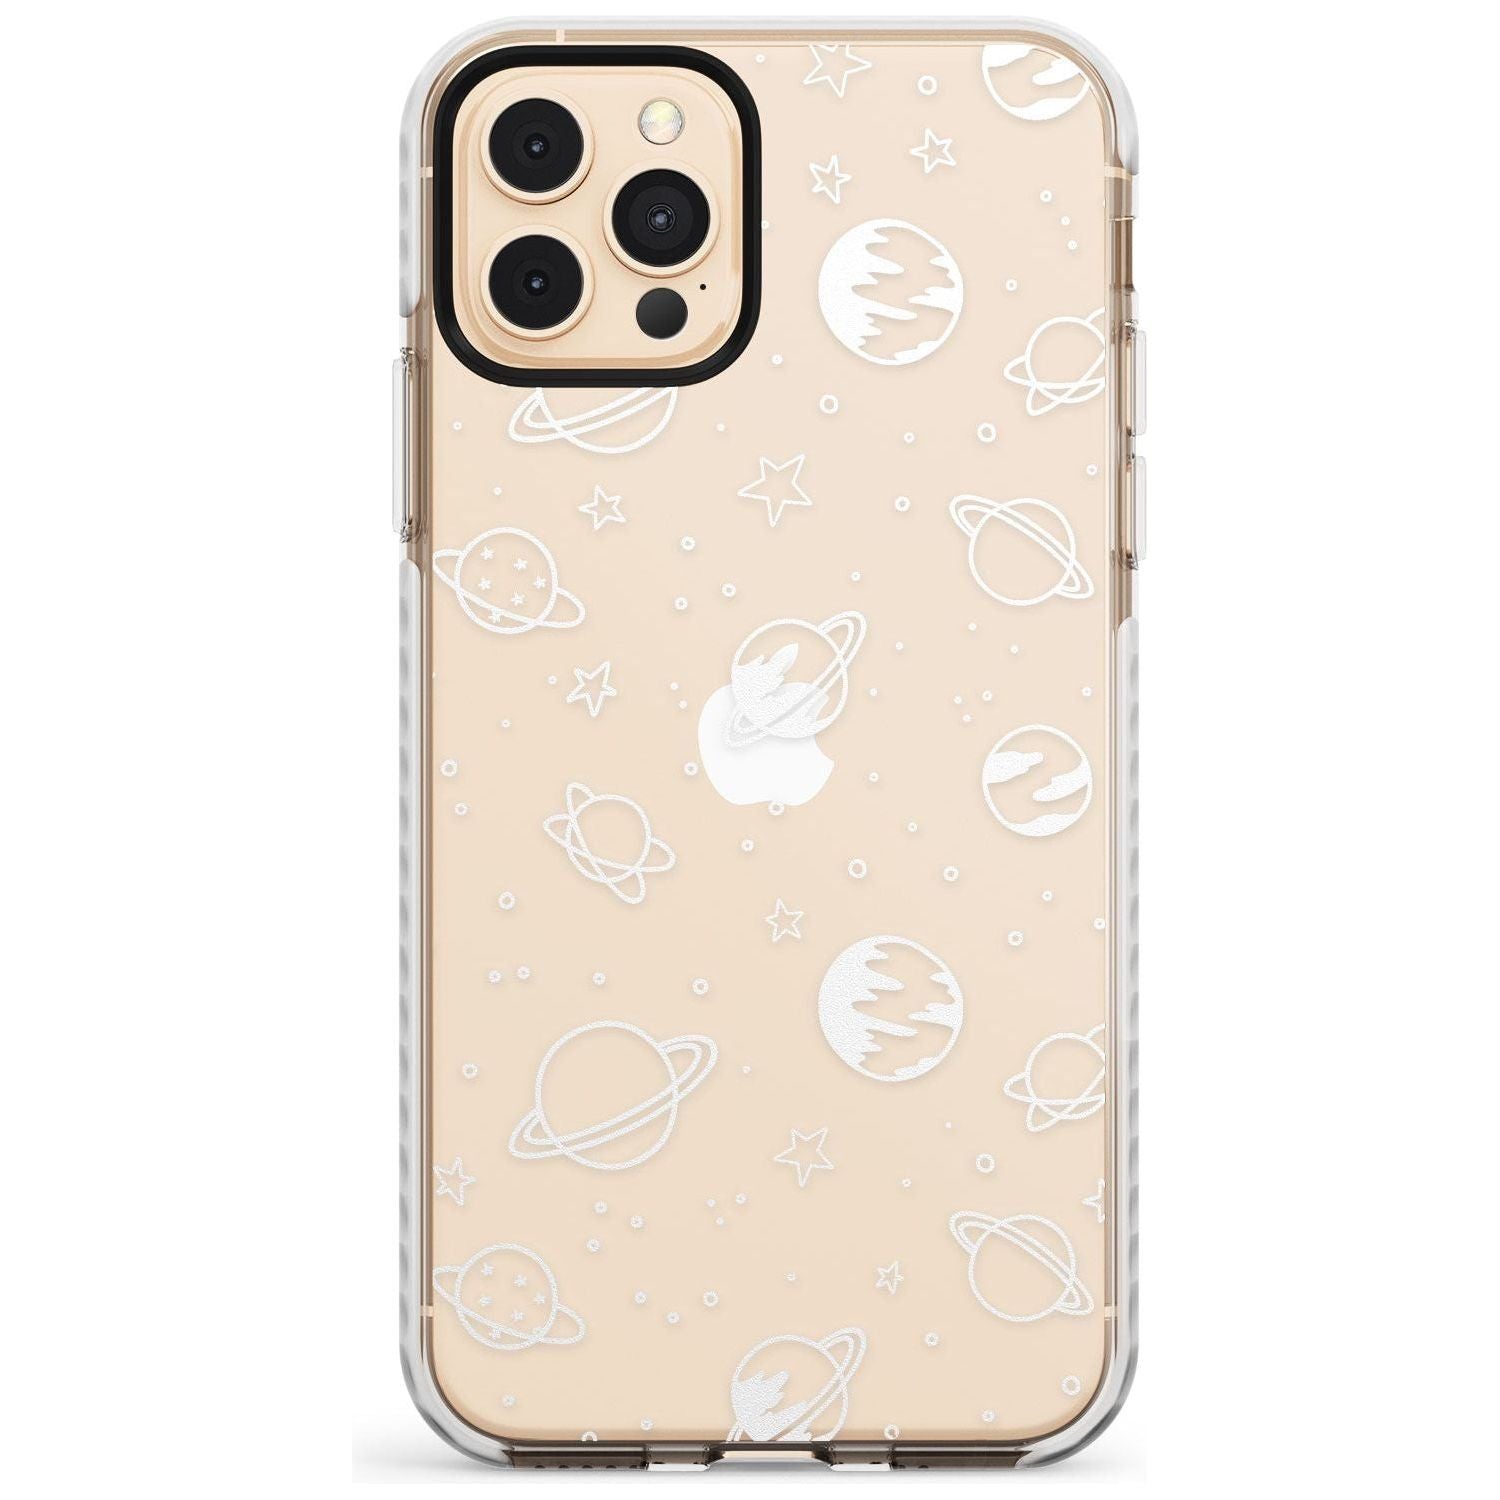 Outer Space Outlines: White on Clear Slim TPU Phone Case for iPhone 11 Pro Max